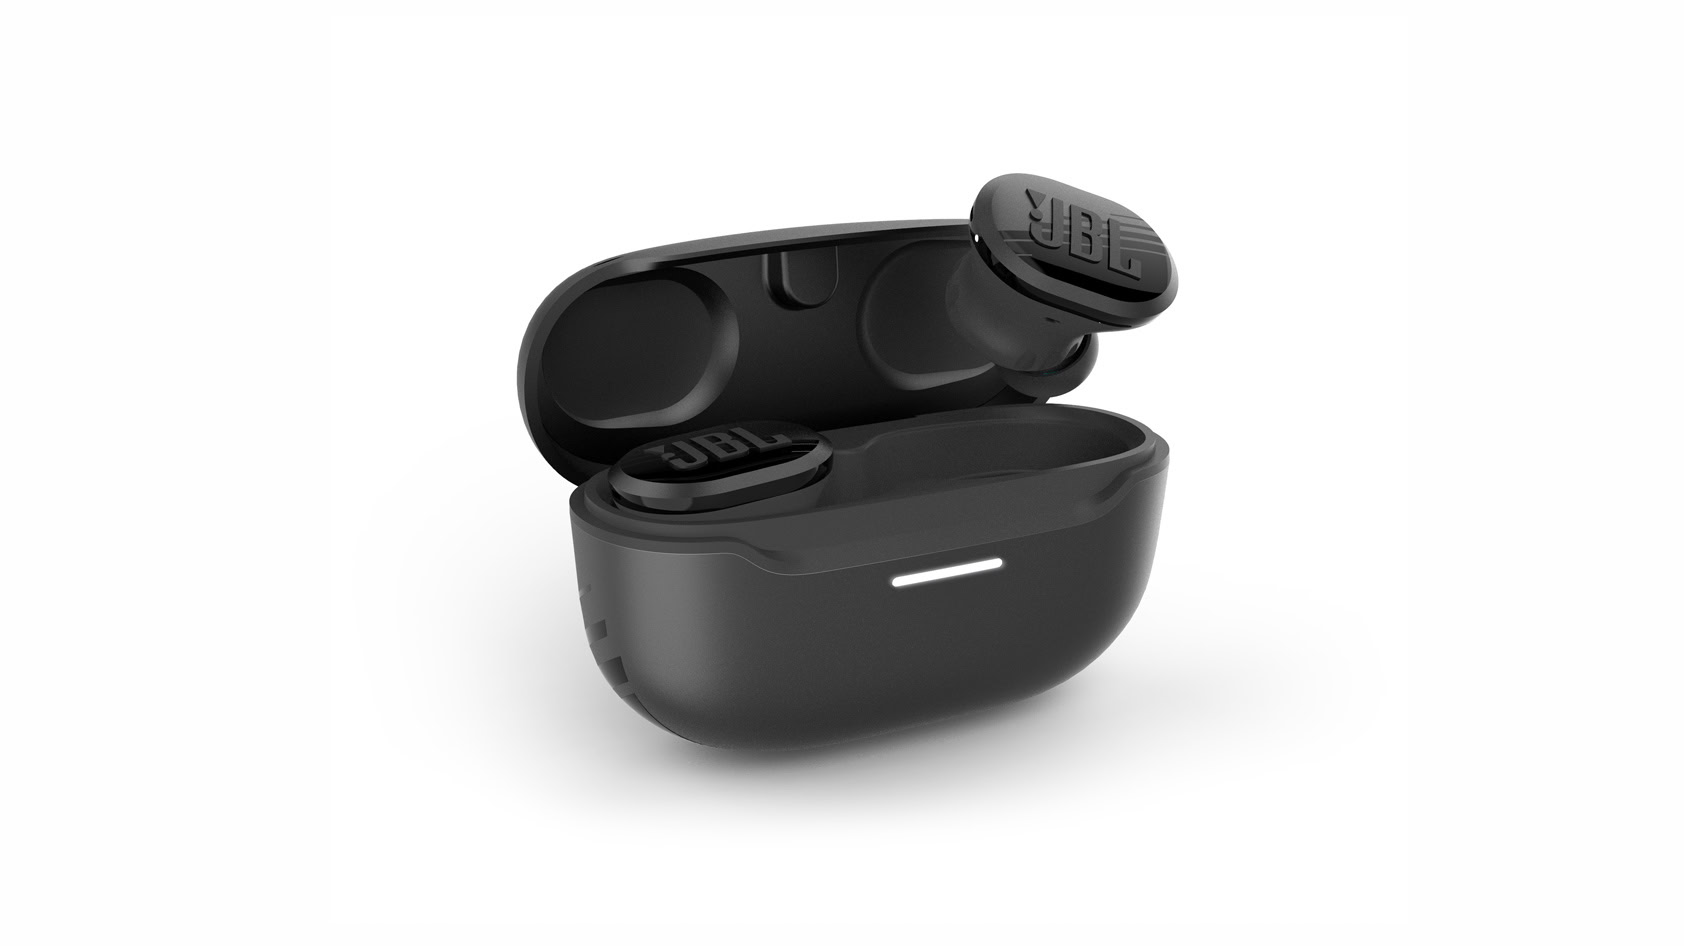 The jbl endurance race true wireless workout earbuds in black against a white background.